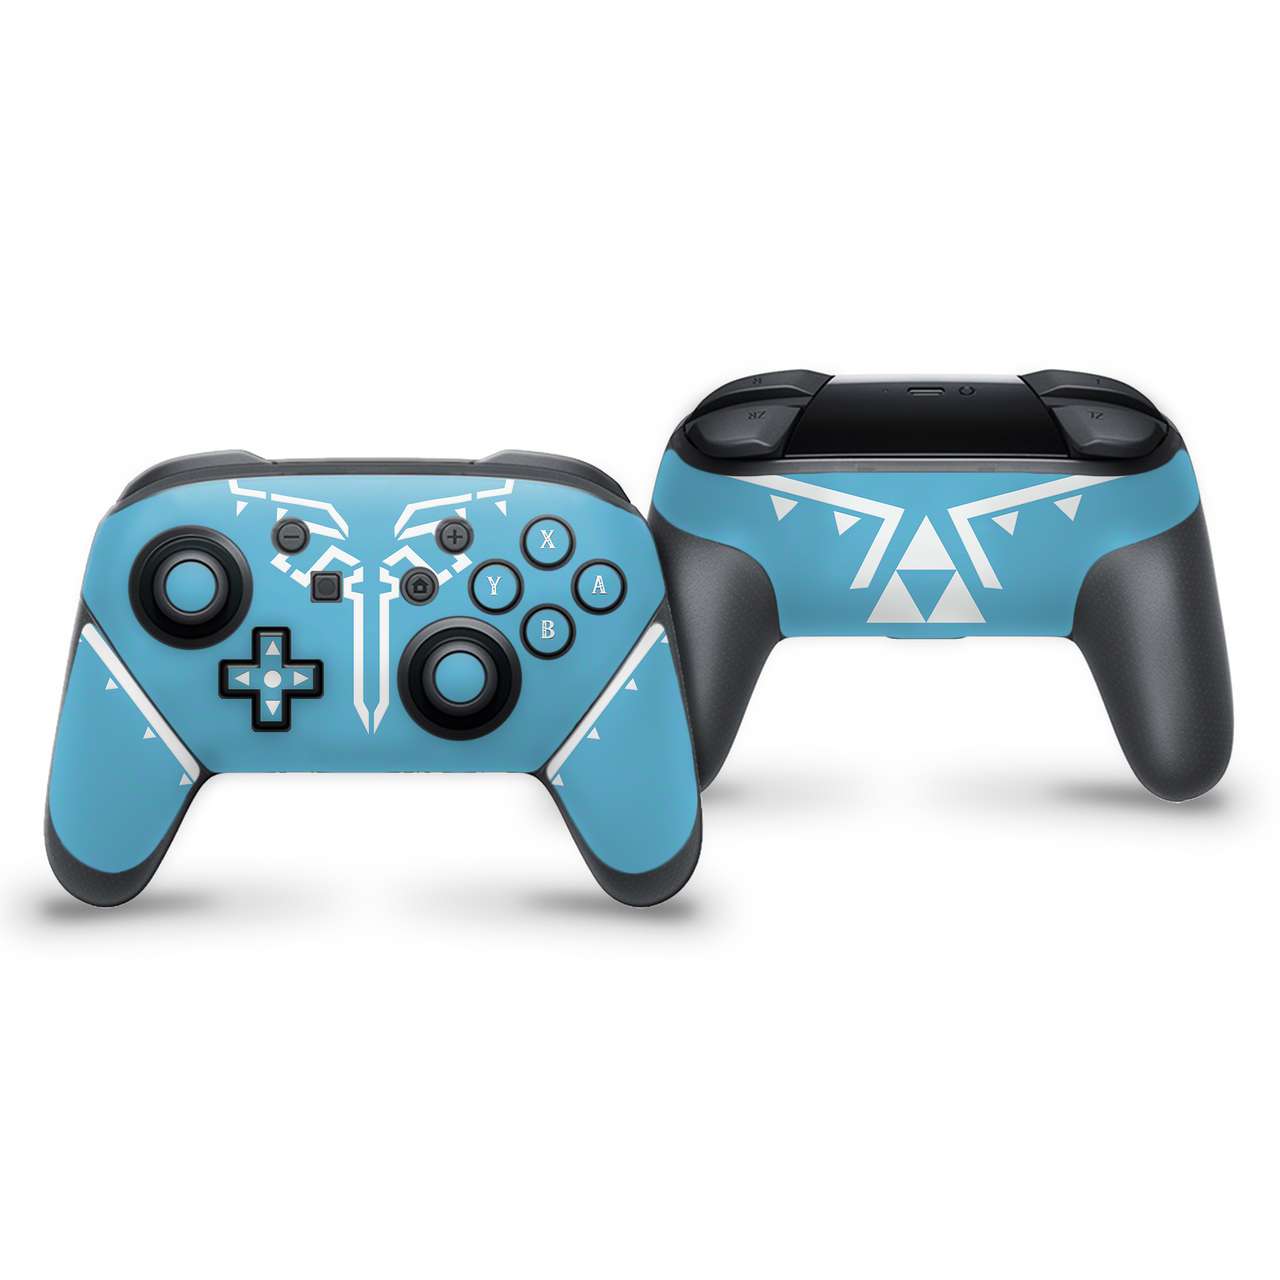 https://cdn11.bigcommerce.com/s-ahgfi493tw/images/stencil/original/products/502/20279/Champions_Tunic_-_Switch_Pro_Controller_Mock_Up__12946_1433__00618.1693362426.jpg